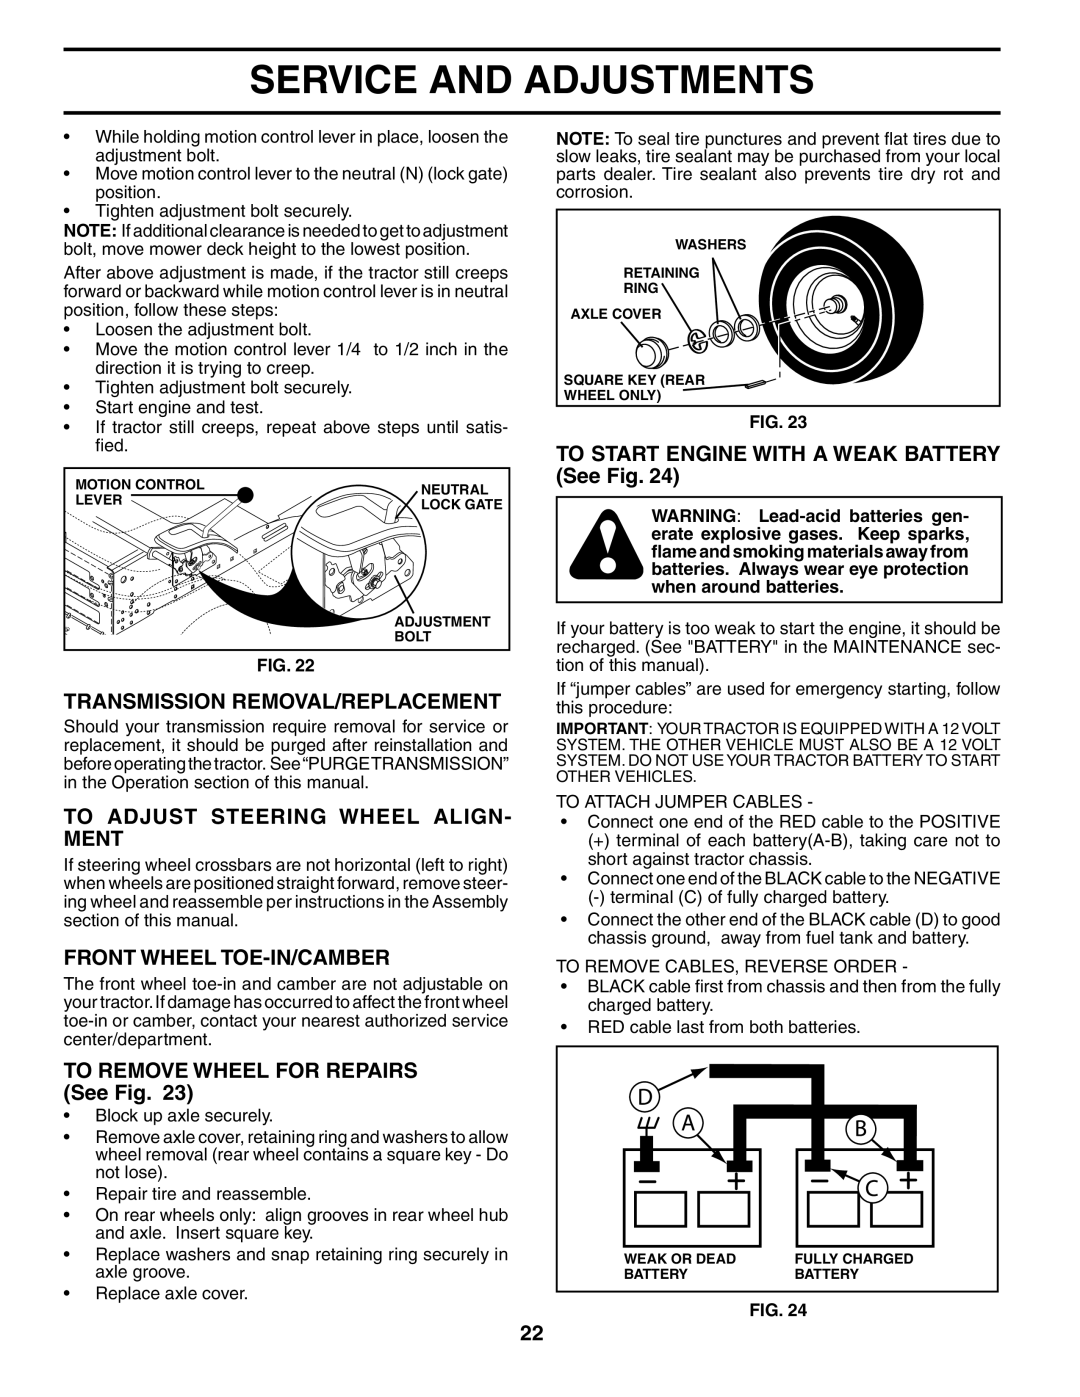 Poulan 197022 manual Transmission REMOVAL/REPLACEMENT, To Adjust Steering Wheel ALIGN- Ment, Front Wheel TOE-IN/CAMBER 